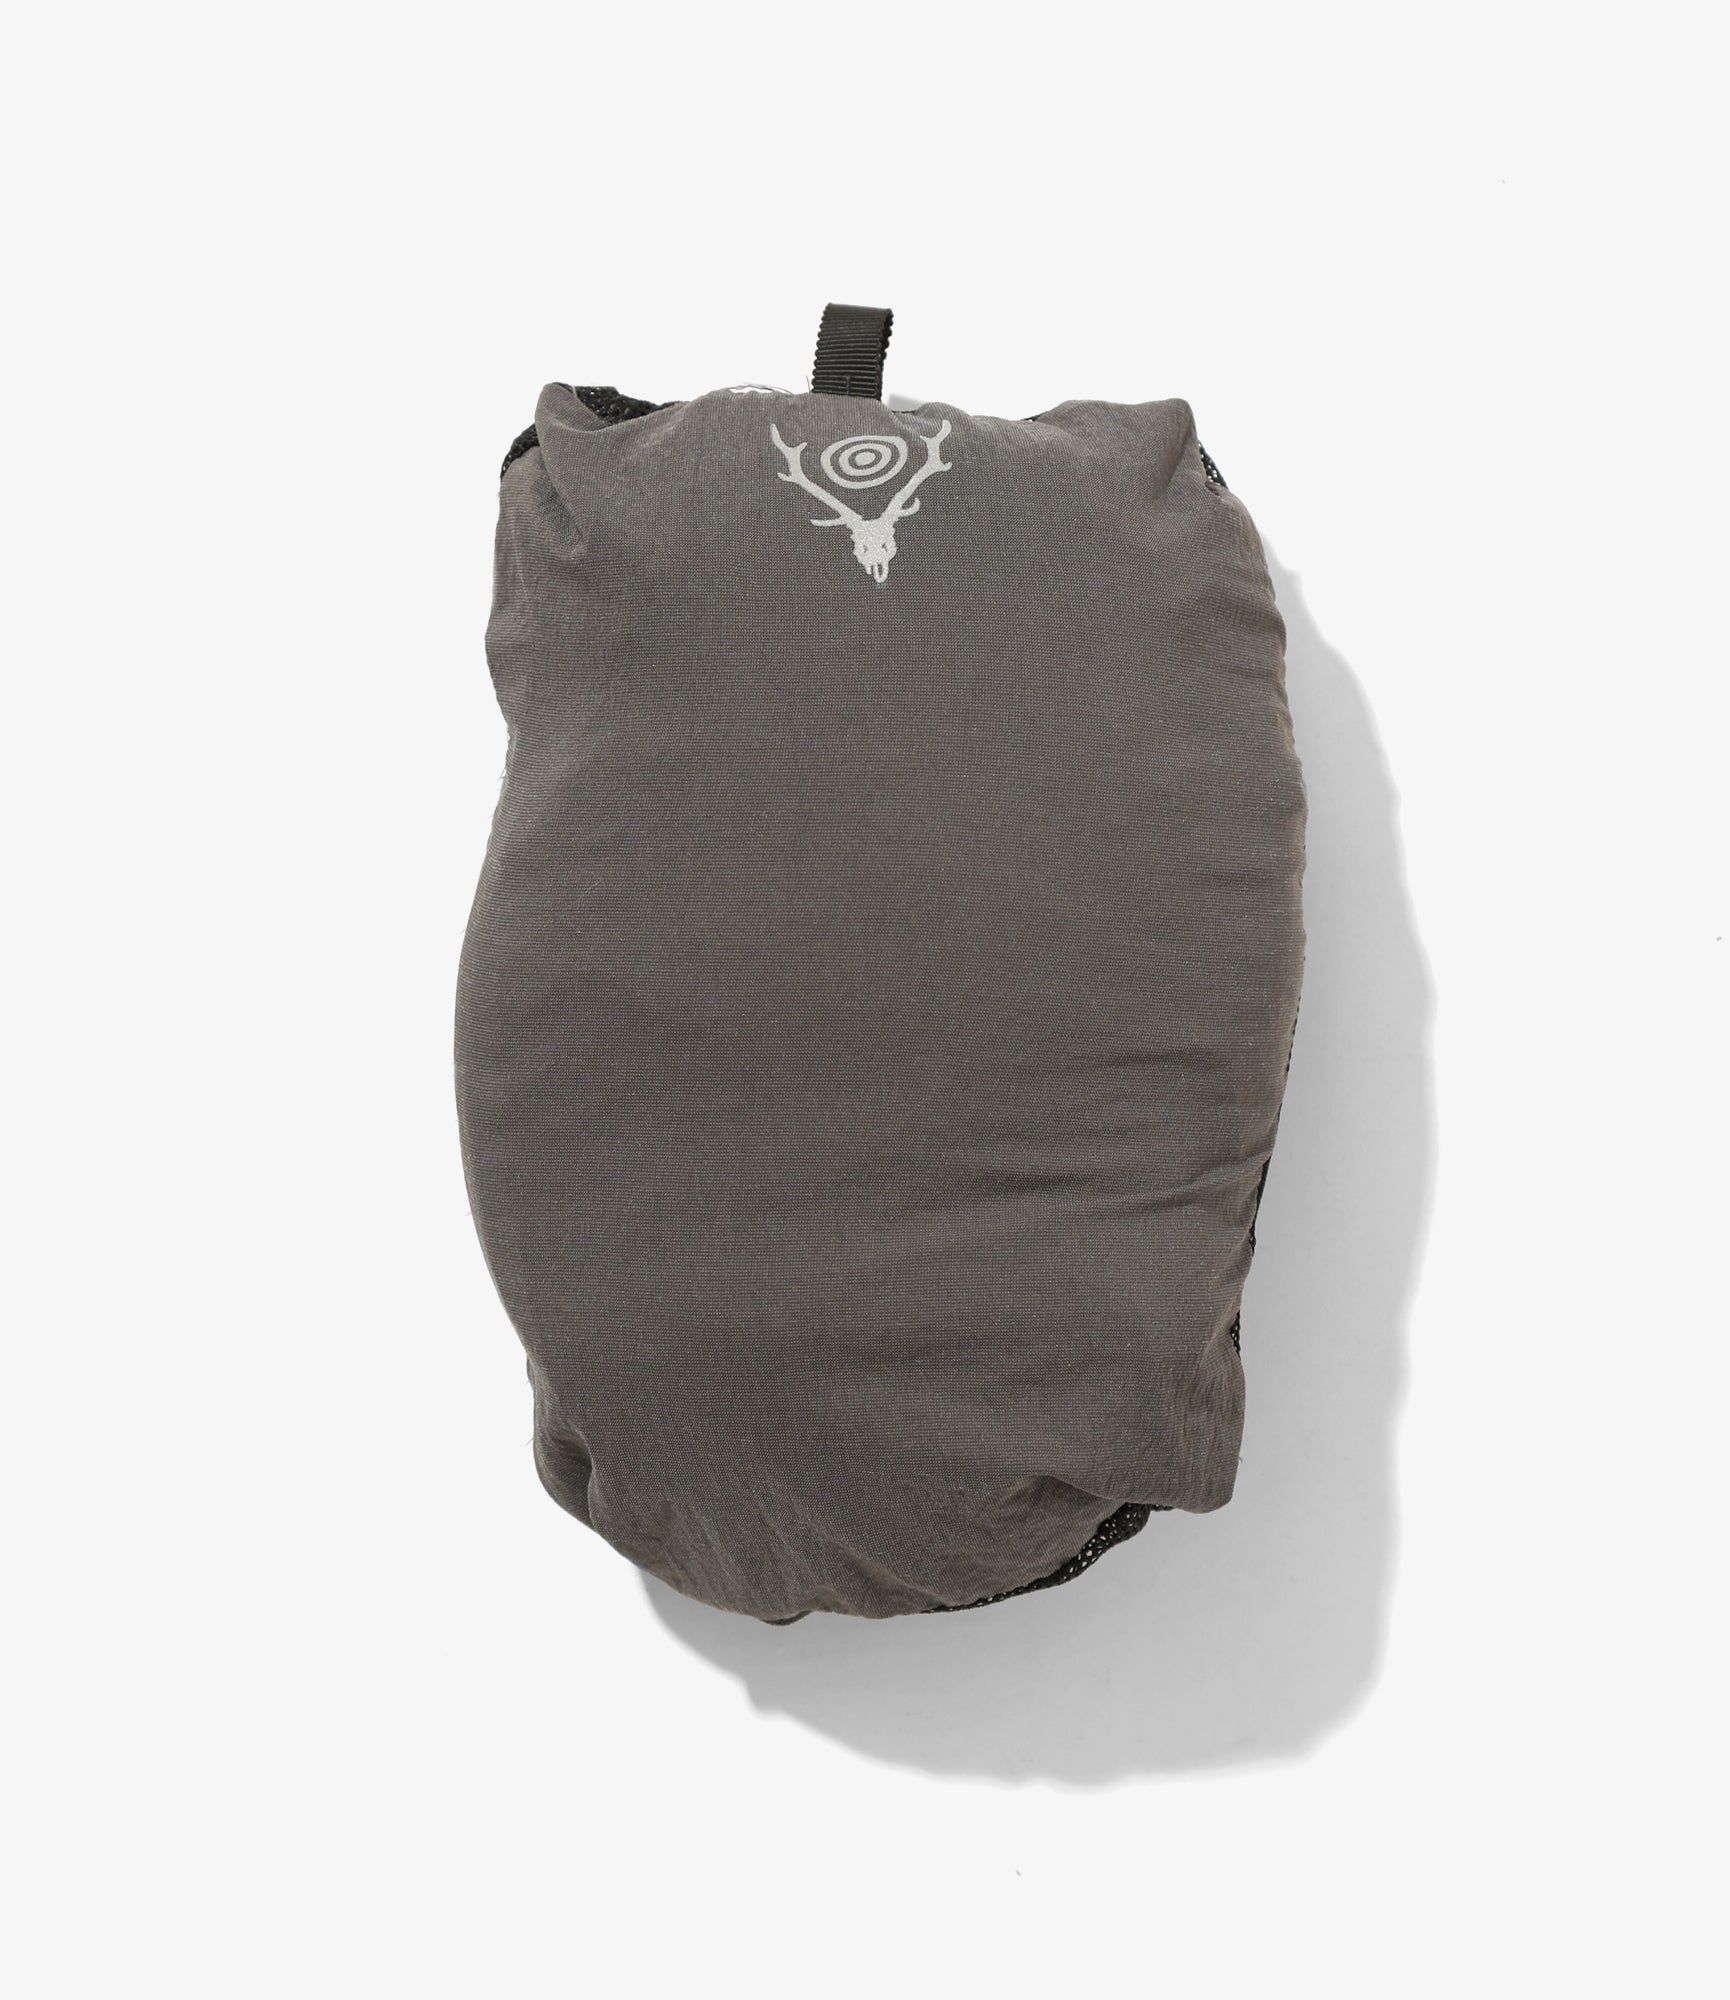 South2 West8 Packable Vest - Nylon Typewriter - Grey